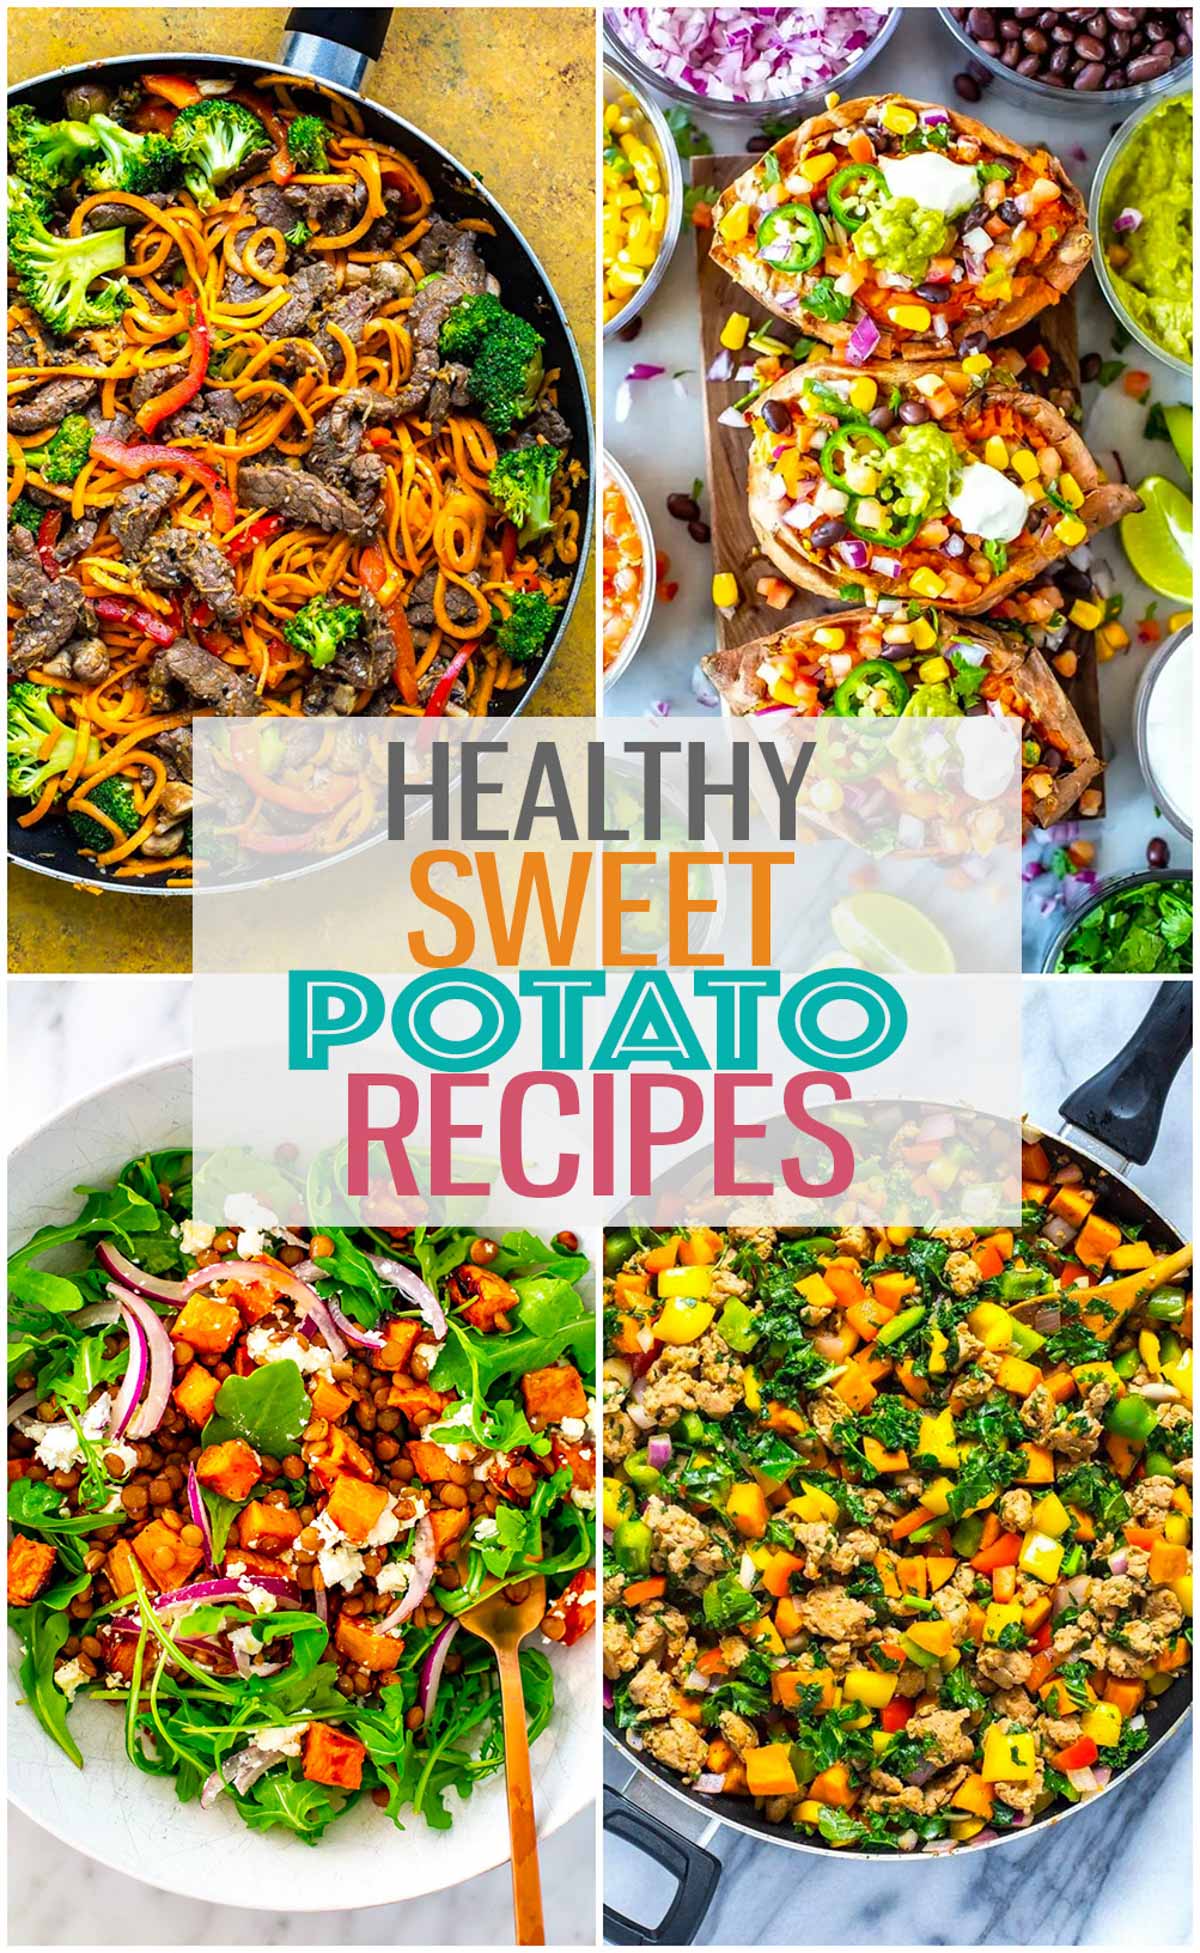 A collage of four sweet potato recipes with the text "Healthy Sweet Potato Recipes" layered over top.